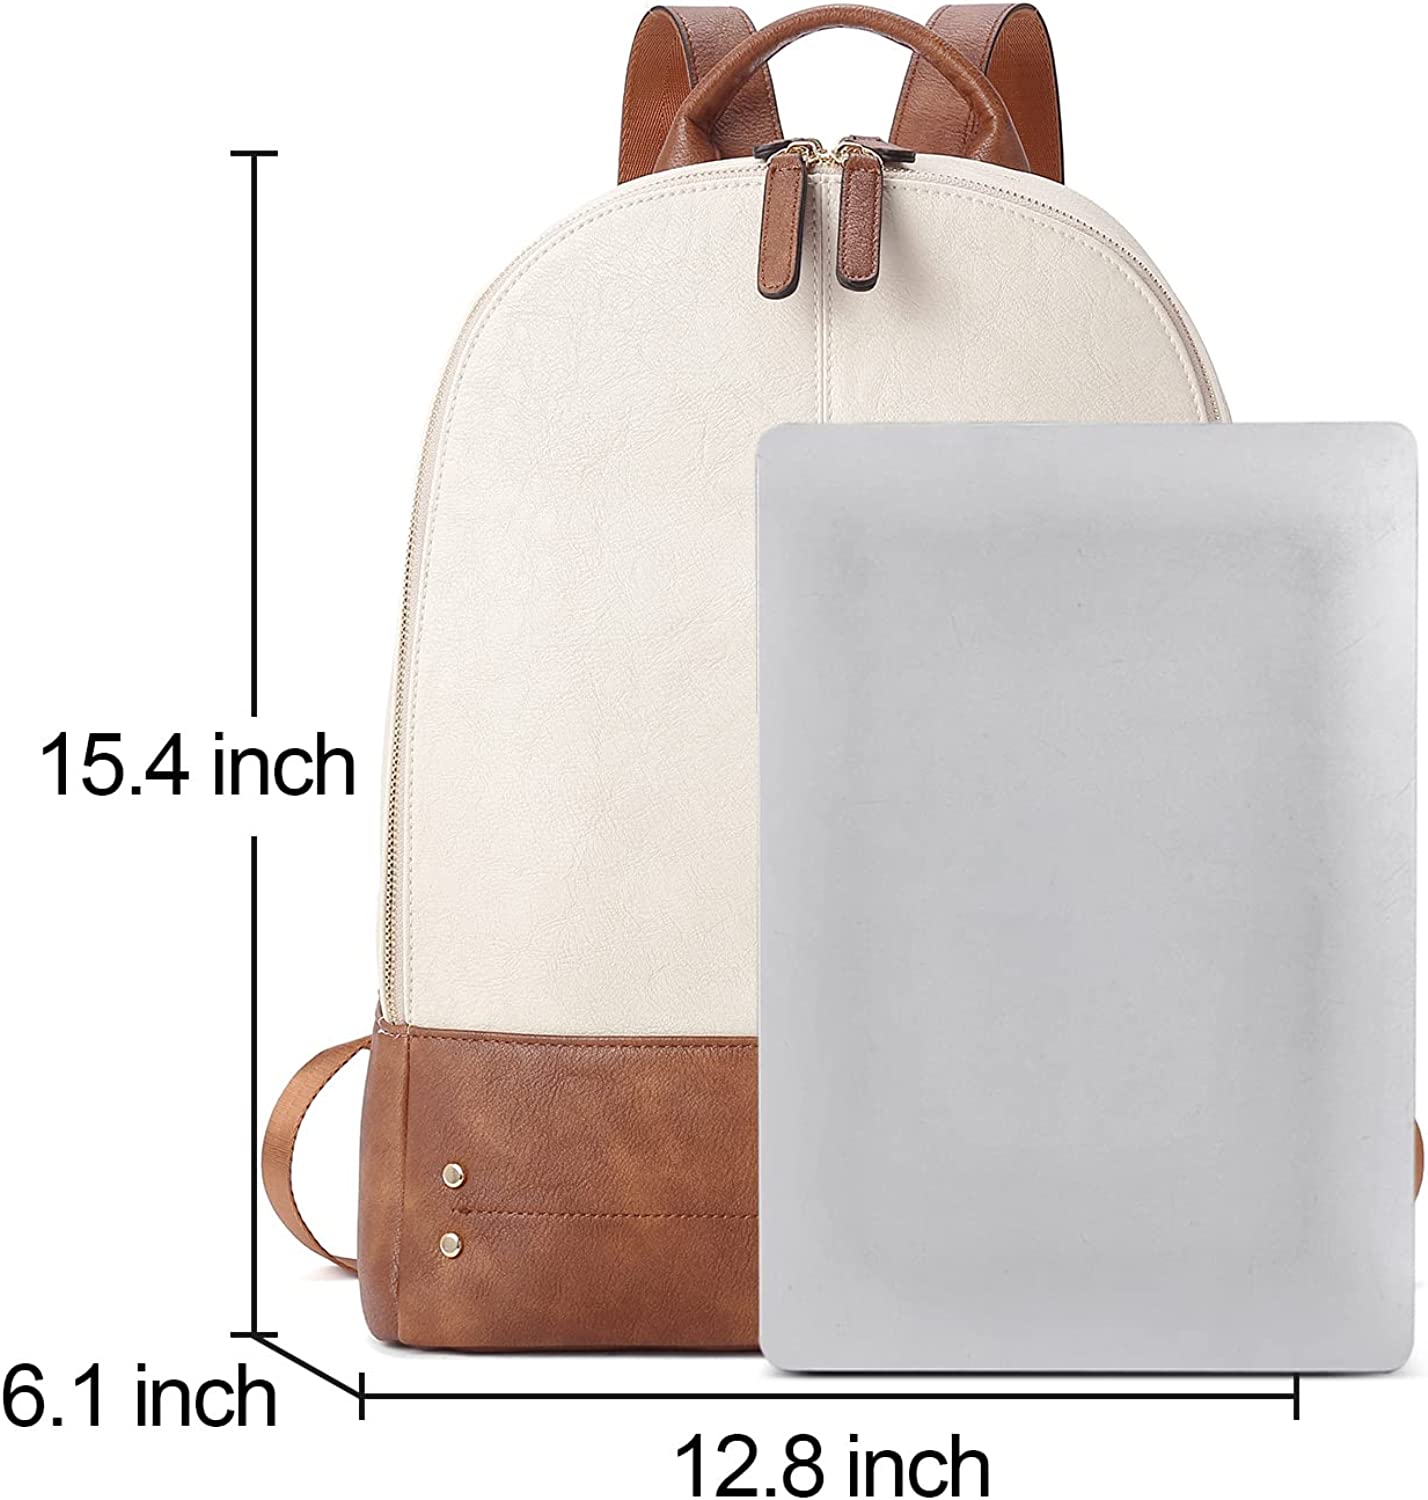 CLUCI Laptop Backpack for Women Leather 15.6 inch Computer Backpack Travel Business Vintage Large College Bag